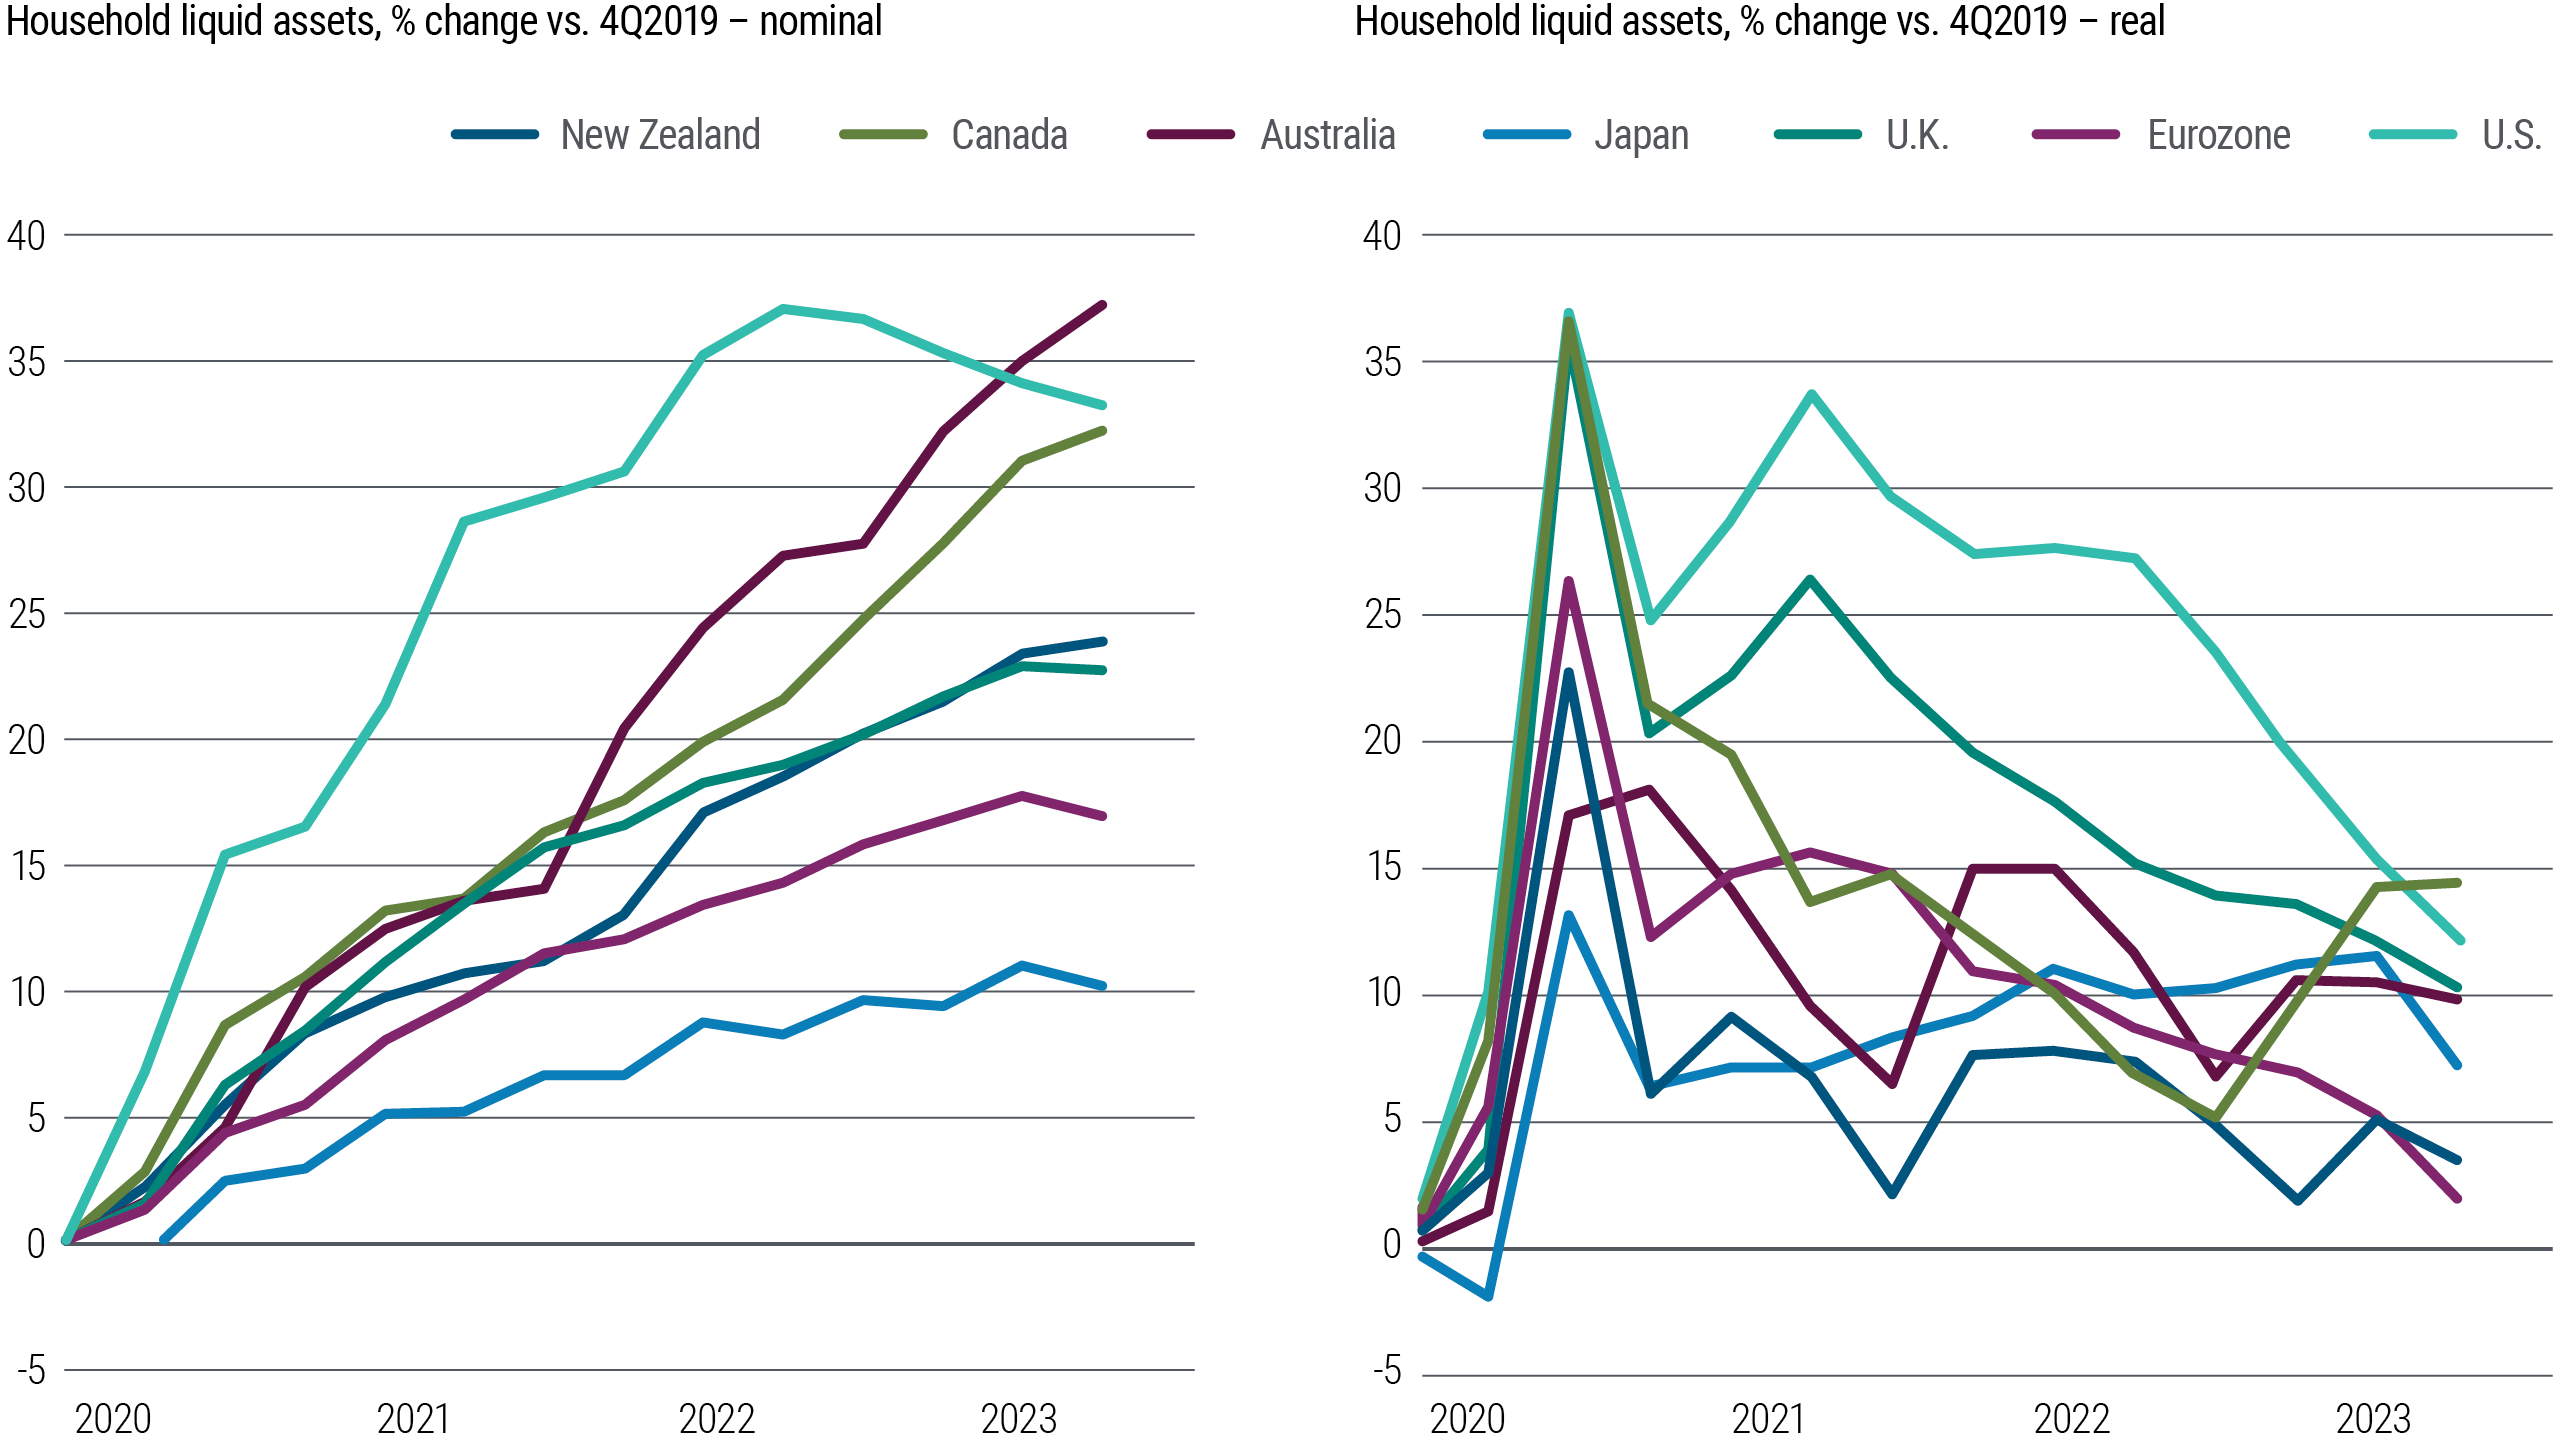 Figure 1 consists of two line charts side by side. The chart at the left shows the percent change in nominal household liquid assets vs. 4Q 2019 in developed market economies – New Zealand, Canada, Australia, Japan, the U.K., the eurozone, and the U.S. – from 2020 through March 2023. The chart at the right shows the change in real household liquid assets for those same countries over the same period. Nominal household liquid assets – including currency, deposits, and money market funds – rose steadily in the U.S. from 4Q 2019, climbing 37% in March 2022 before fading. Assets have steadily increased in Australia, to 37% in March 2023 versus 4Q 2019 levels. Nominal assets rose less sharply in the U.K., the eurozone, and Japan and have shown signs of peaking in those regions. In real terms, the increase in household liquid assets has slowed steadily in all countries versus 4Q 2019 since their peak in mid-2020. However, the change in real household assets has remained above zero in all regions. The source for the data is PIMCO, the OECD, national statistics offices and central banks as of 11 September 2023.